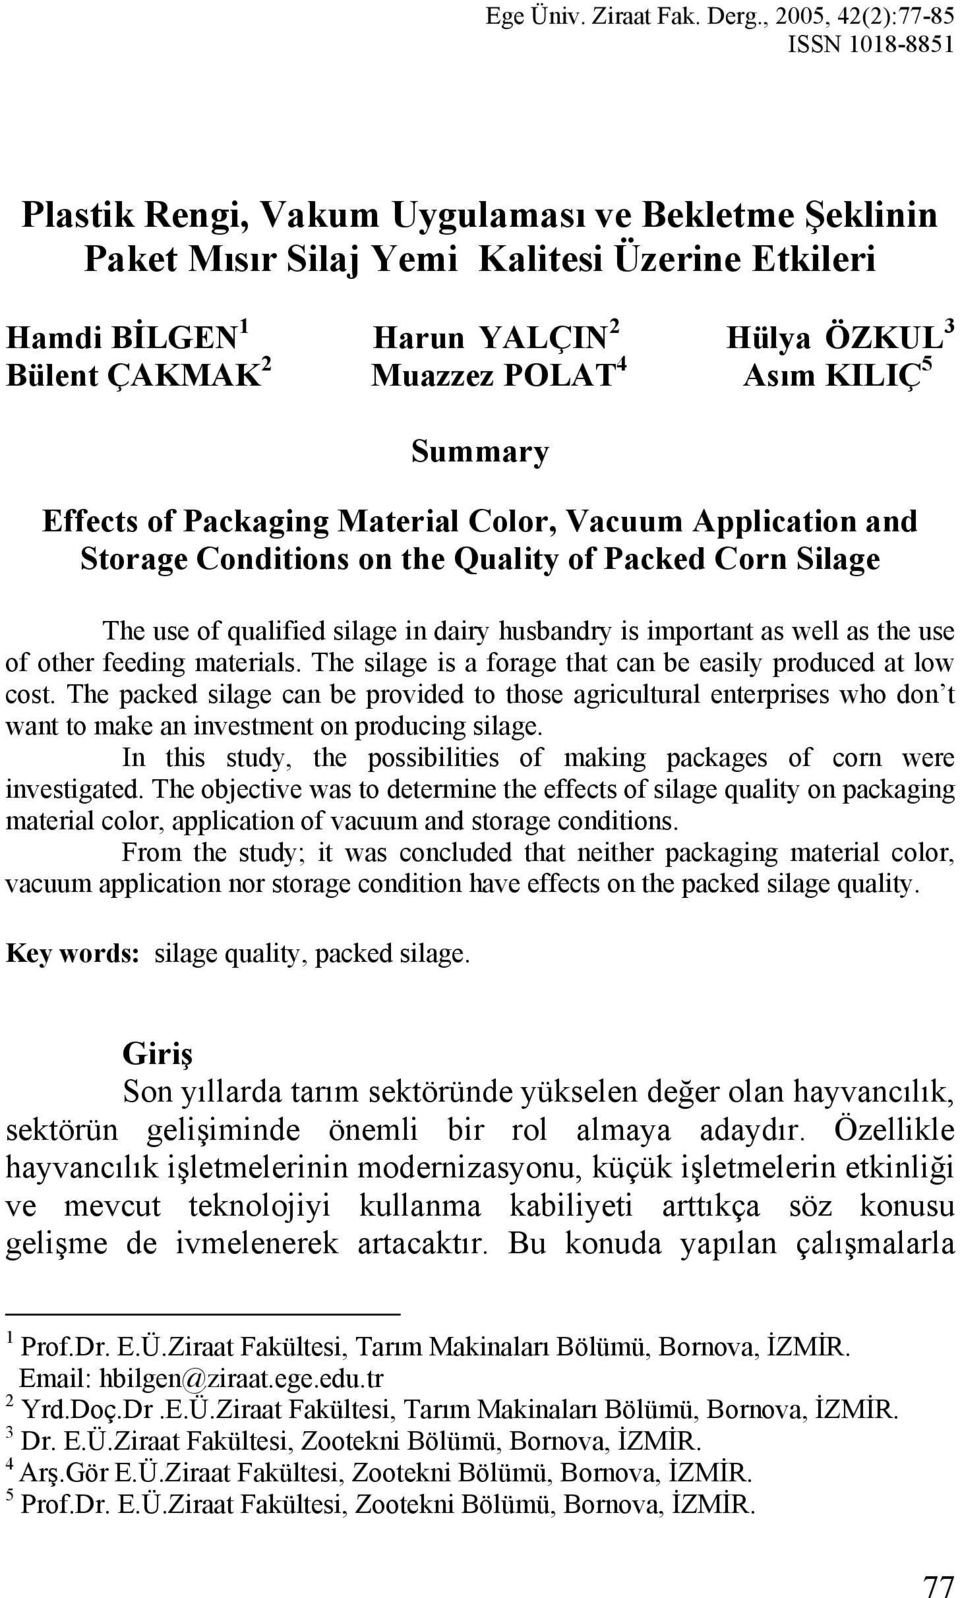 Muazzez POLAT 4 Asım KILIÇ 5 Summary Effects of Packaging Material Color, Vacuum Application and Storage Conditions on the Quality of Packed Corn Silage The use of qualified silage in dairy husbandry